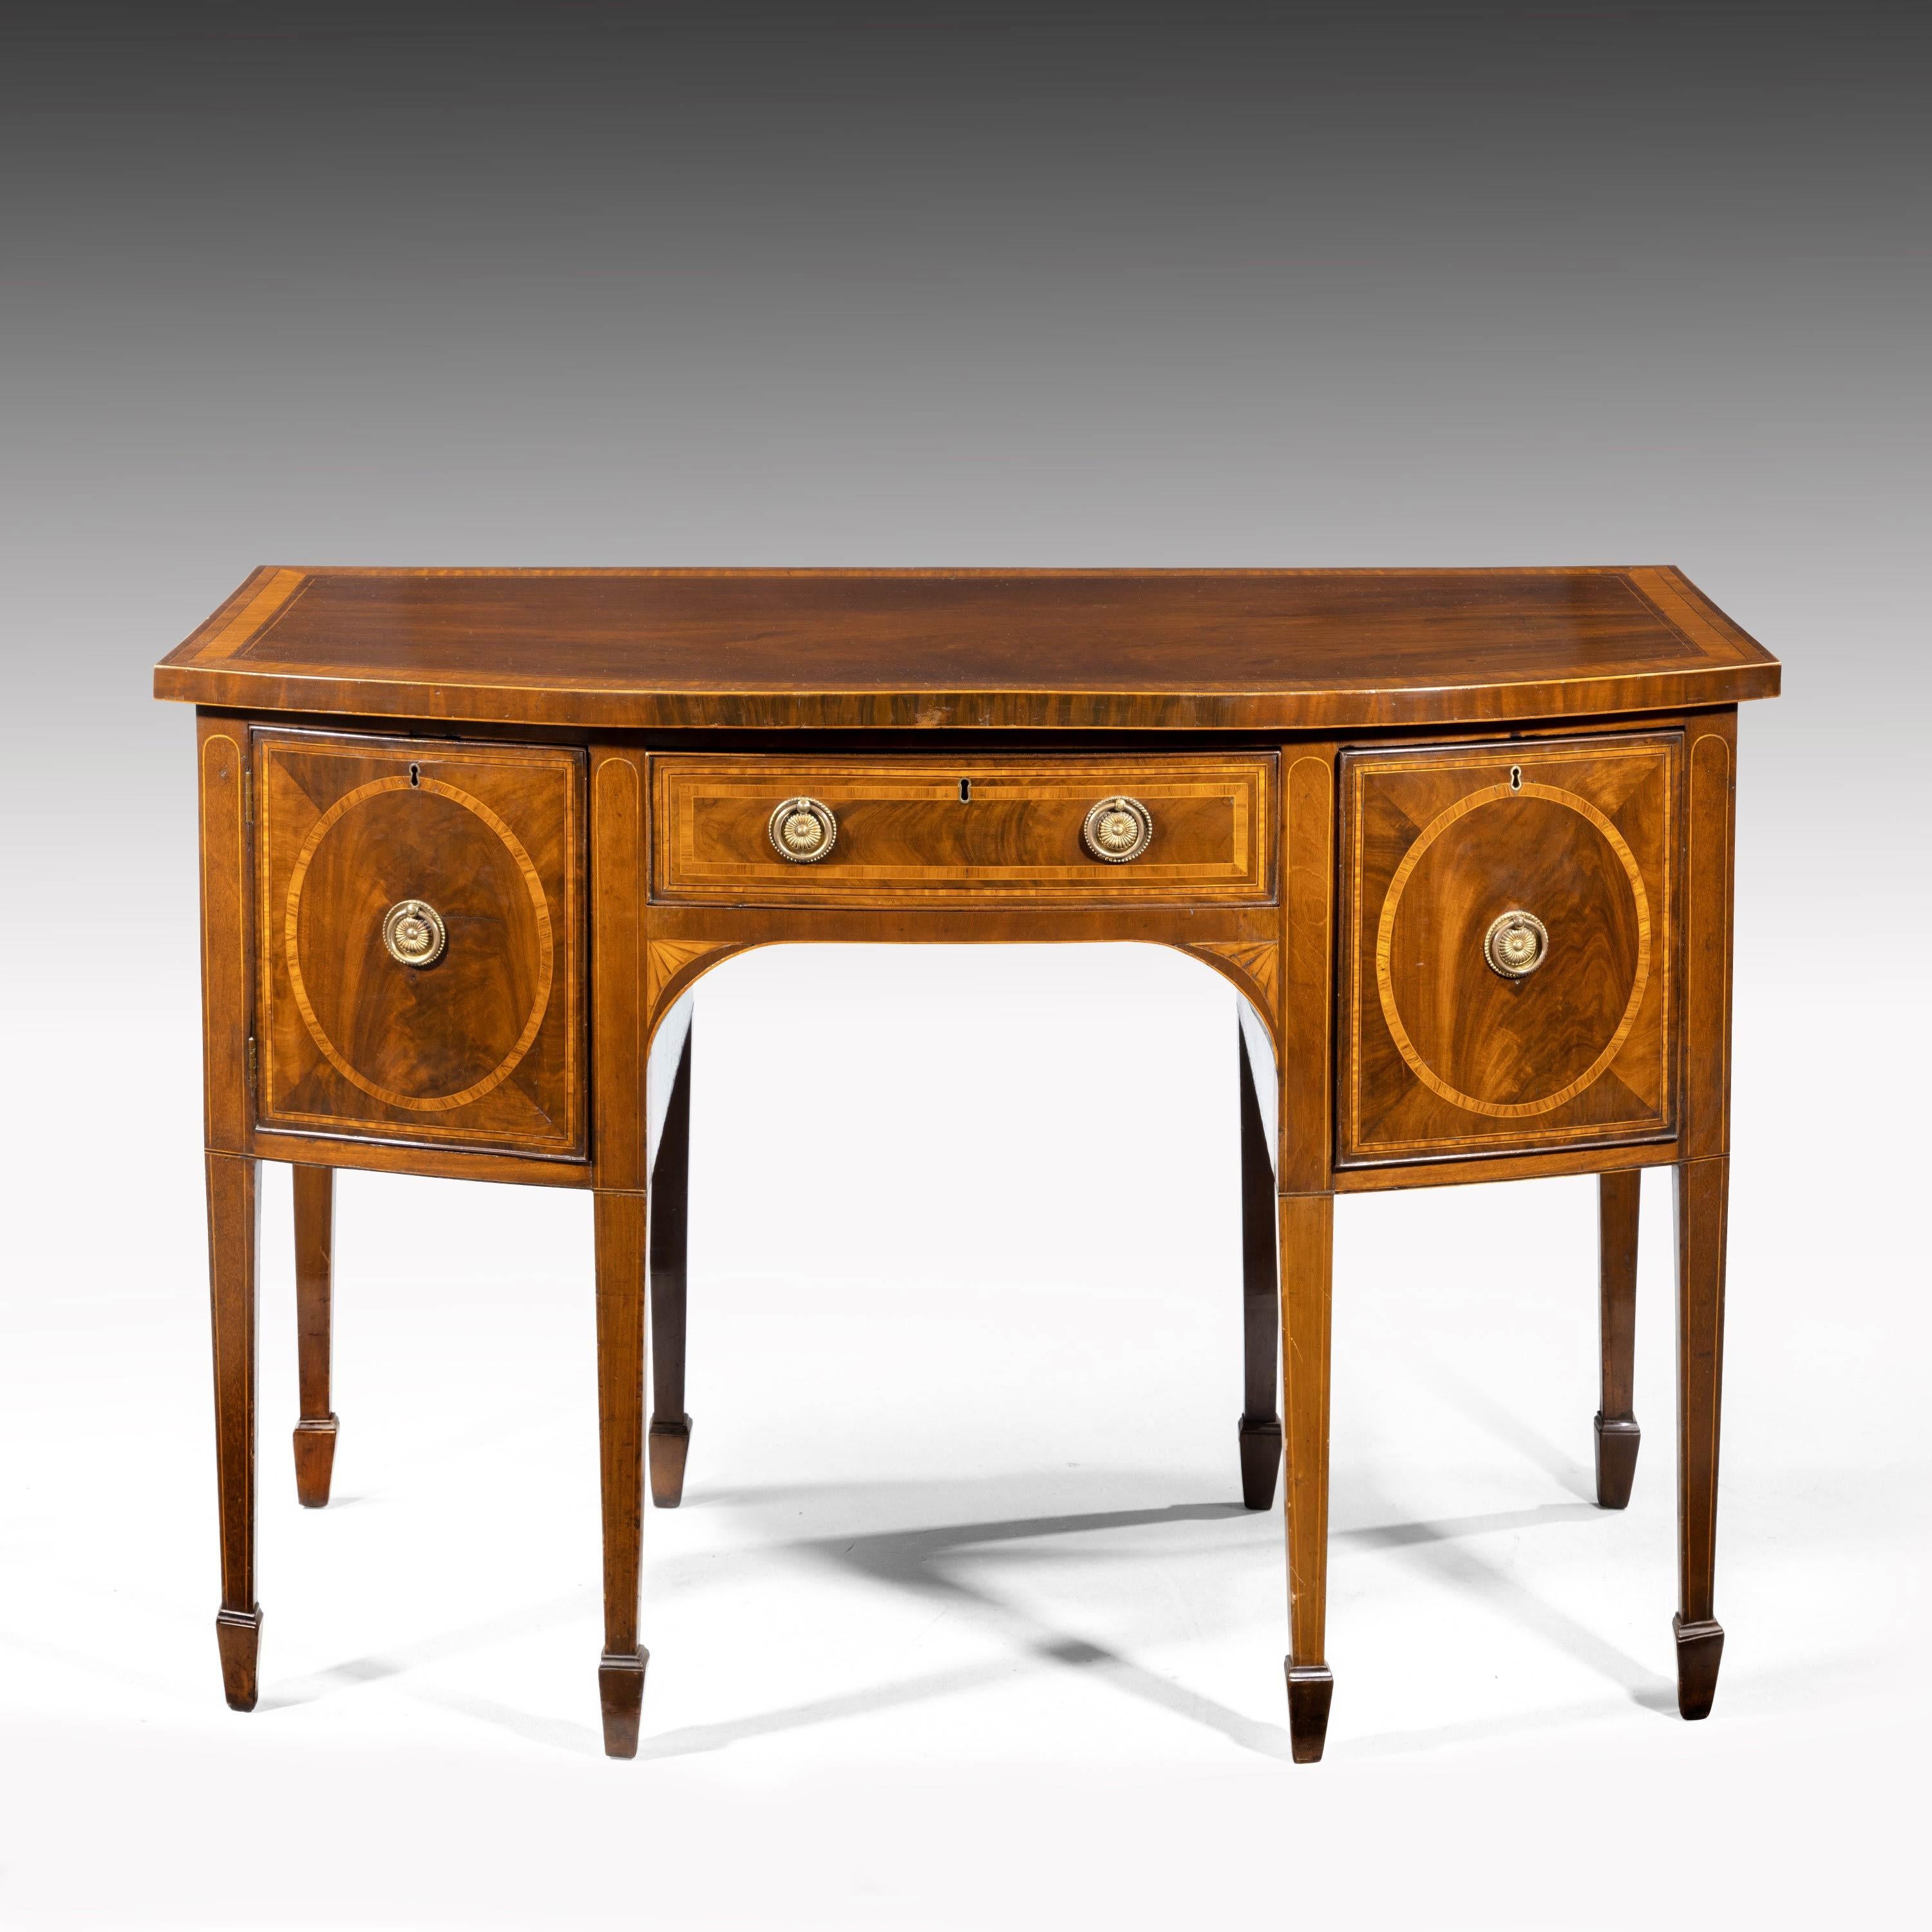 A George III Sheraton period mahogany bow front sideboard. With fine crossbanding work in boxwood string. With other timbers. Quartered drawer fronts to the left and right hand side. On fine, chamfered, tapering supports ending in block feet.
 